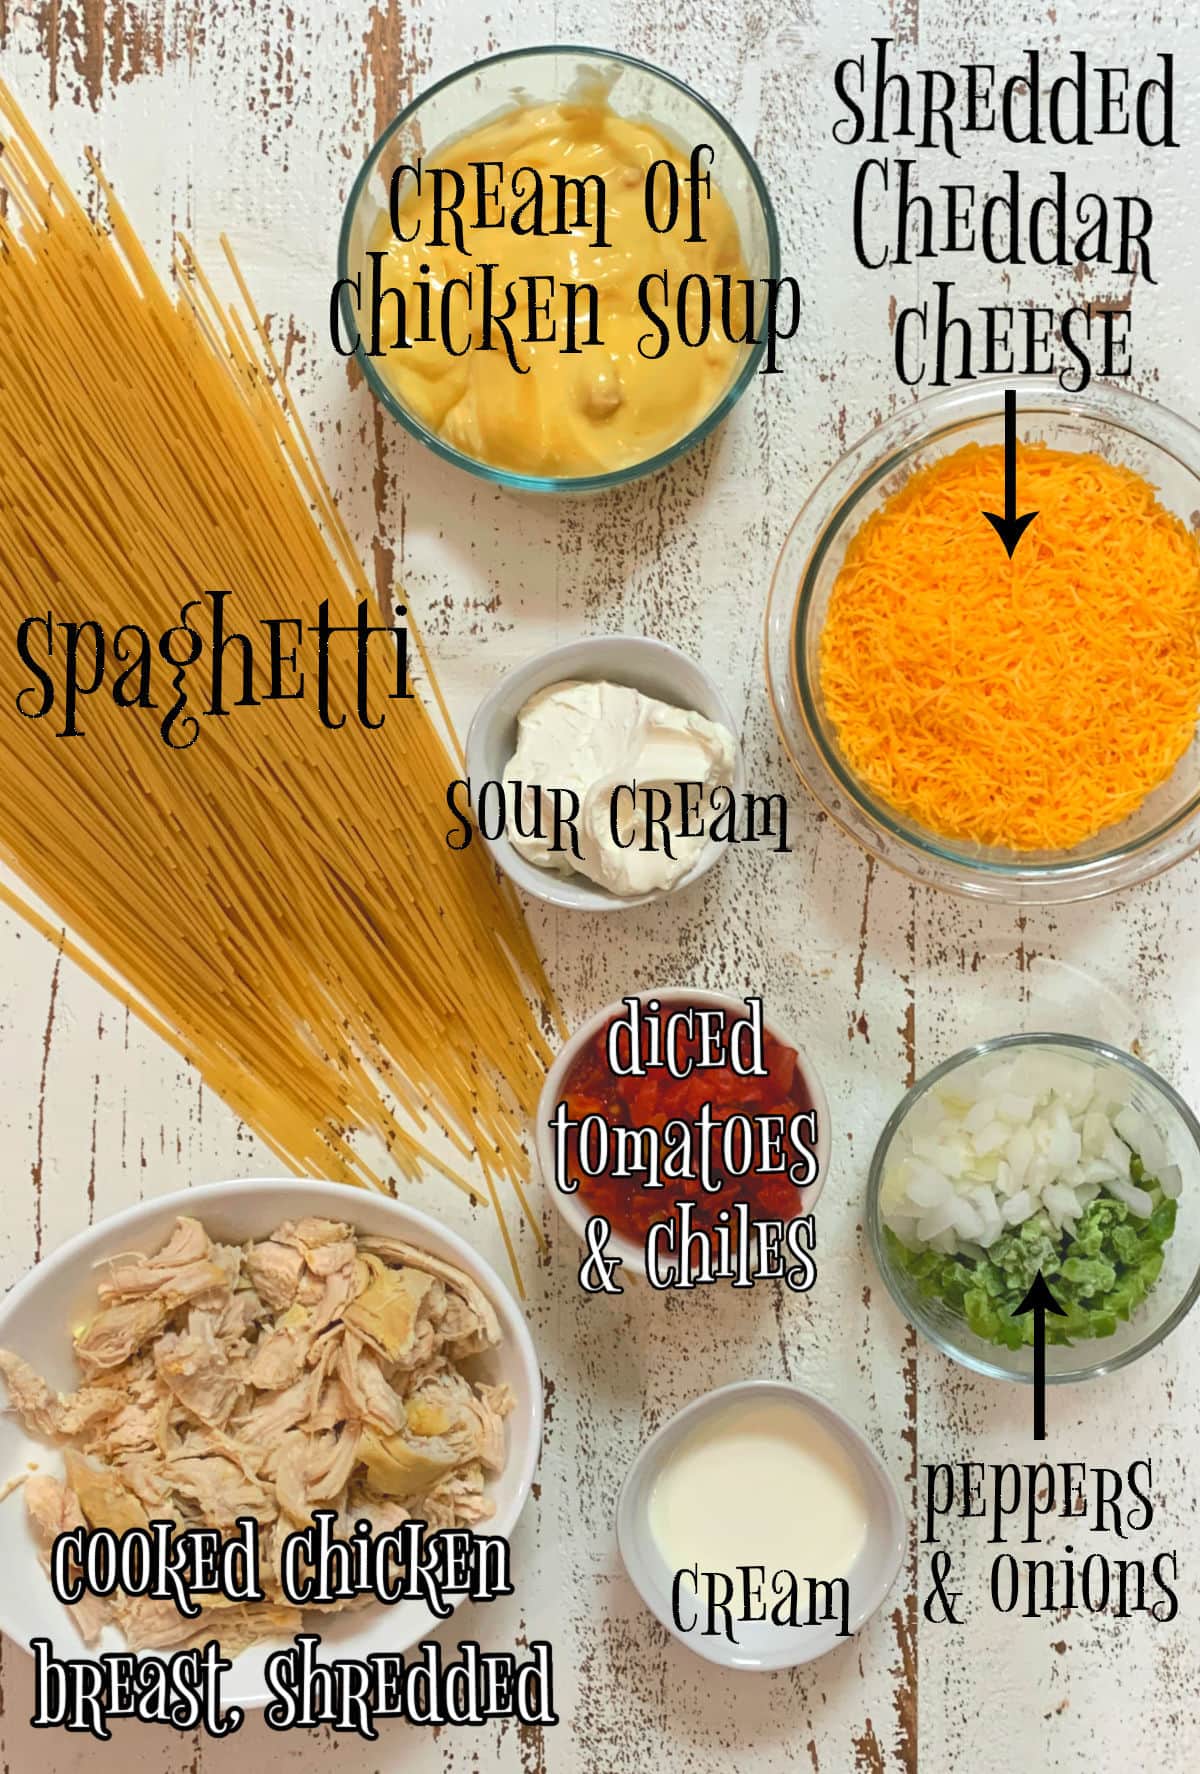 Labeled ingredients for chicken spaghetti.